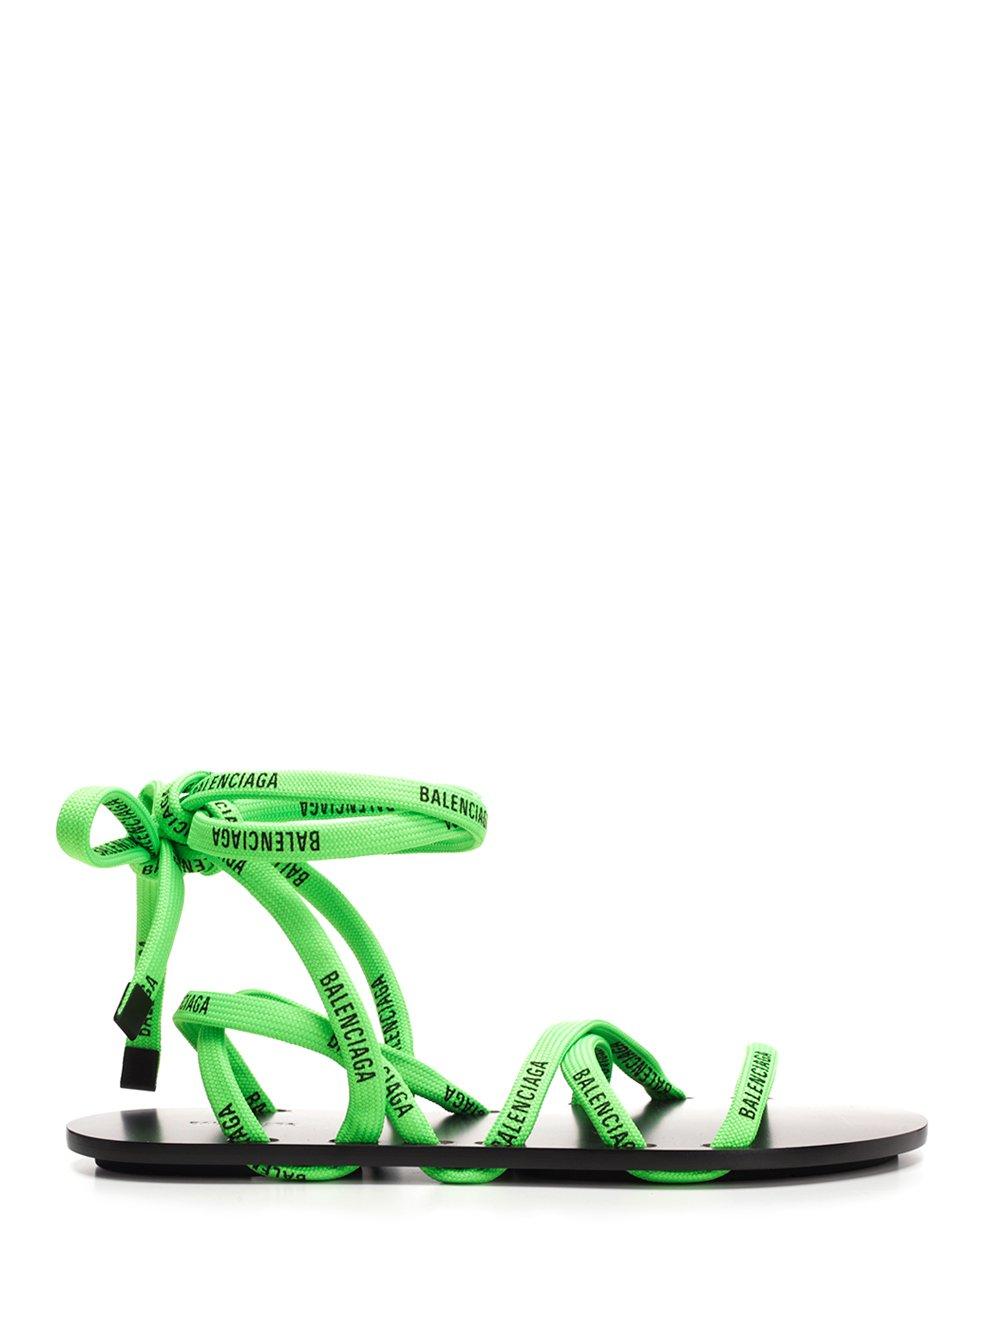 Balenciaga Lace-up Sandals in Green - Lyst